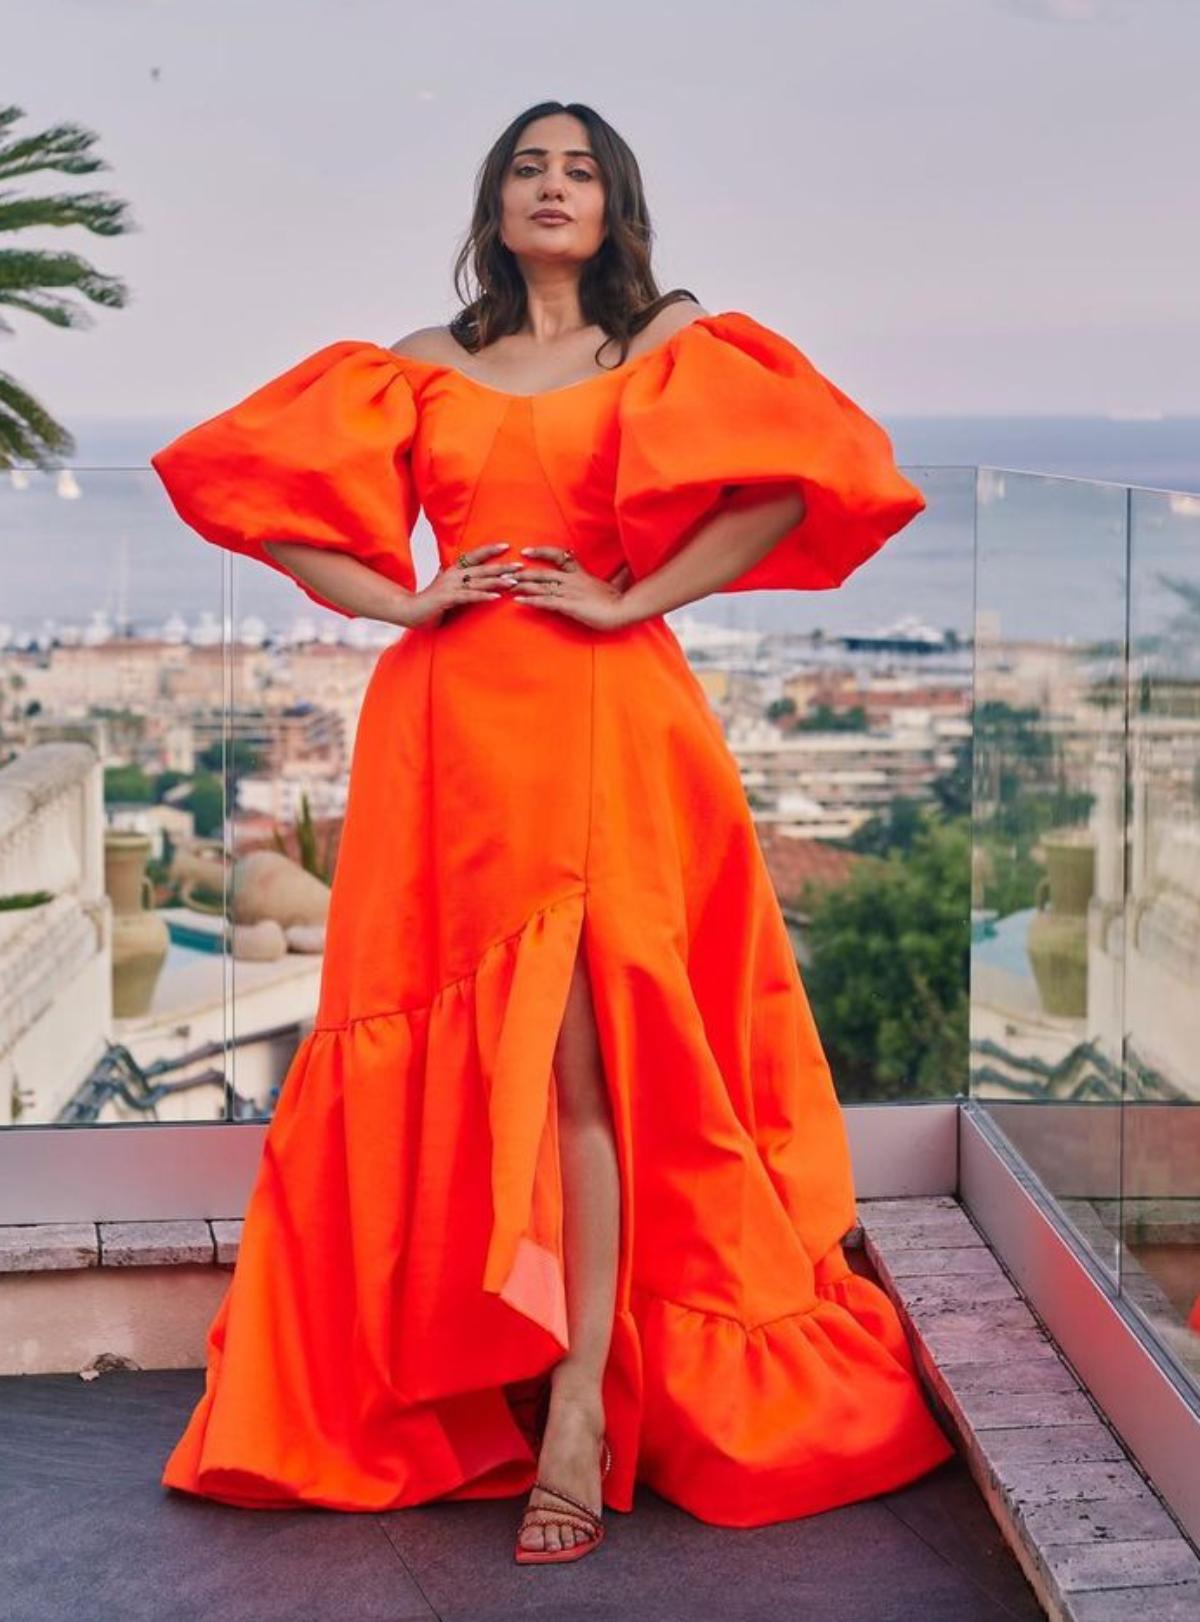 One of the biggest social media content creators, 'Comedy Queen', Kusha Kapila who is all set to walk the coveted red carpet of the 76th Cannes Film Festival, painted the streets of France orange as she stepped out in a gorgeous orange knee-slit flowy gown. 